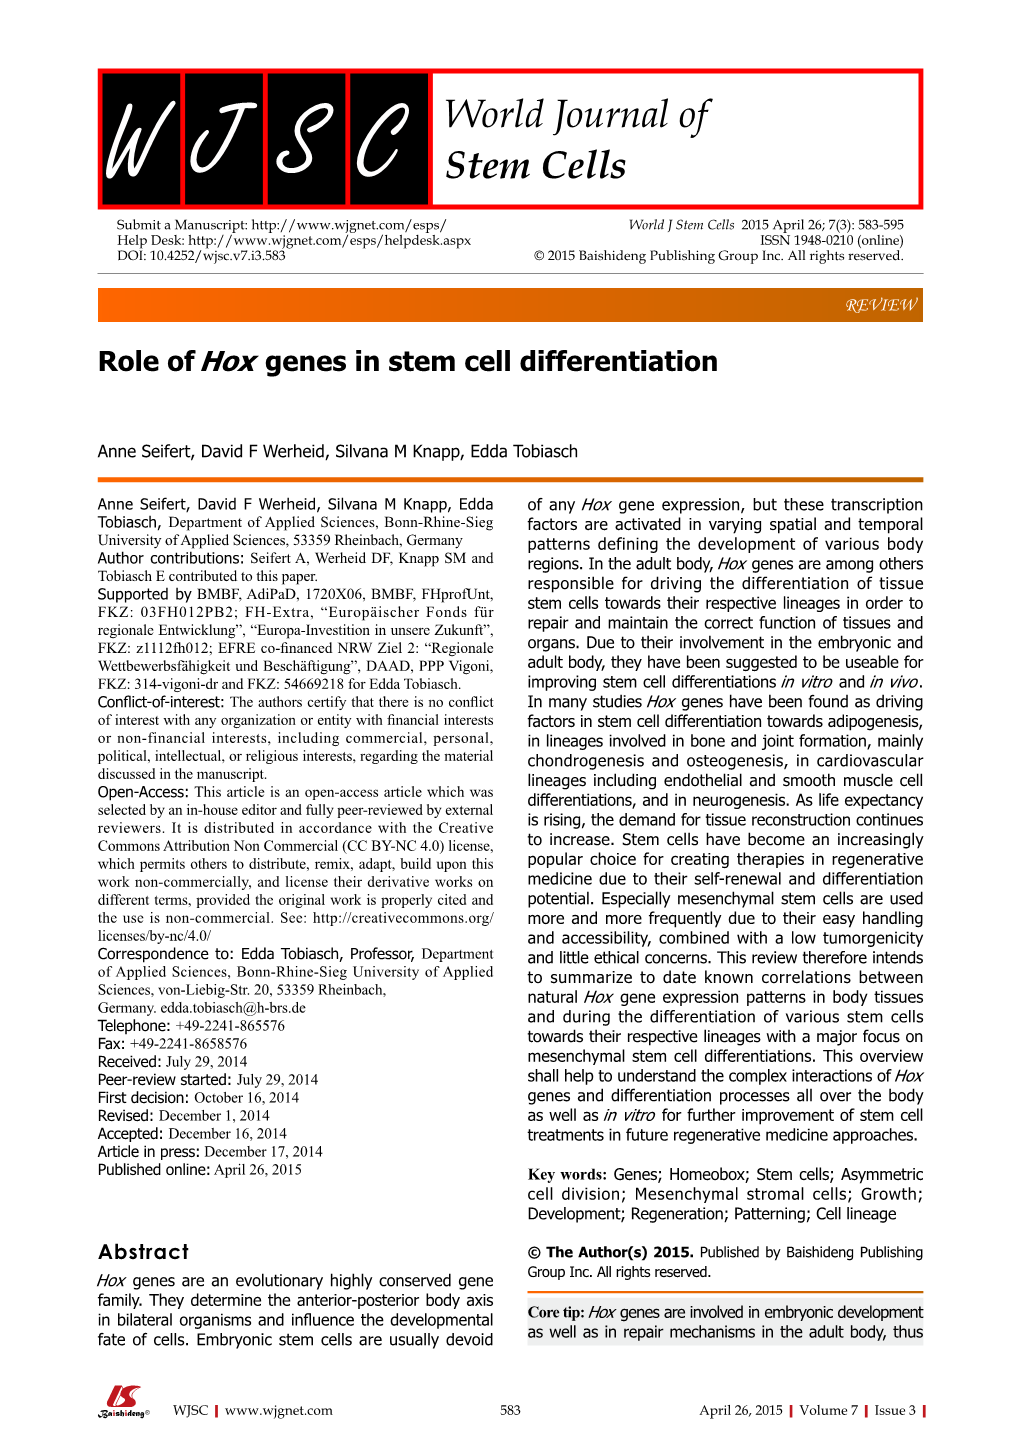 Role of Hox Genes in Stem Cell Differentiation